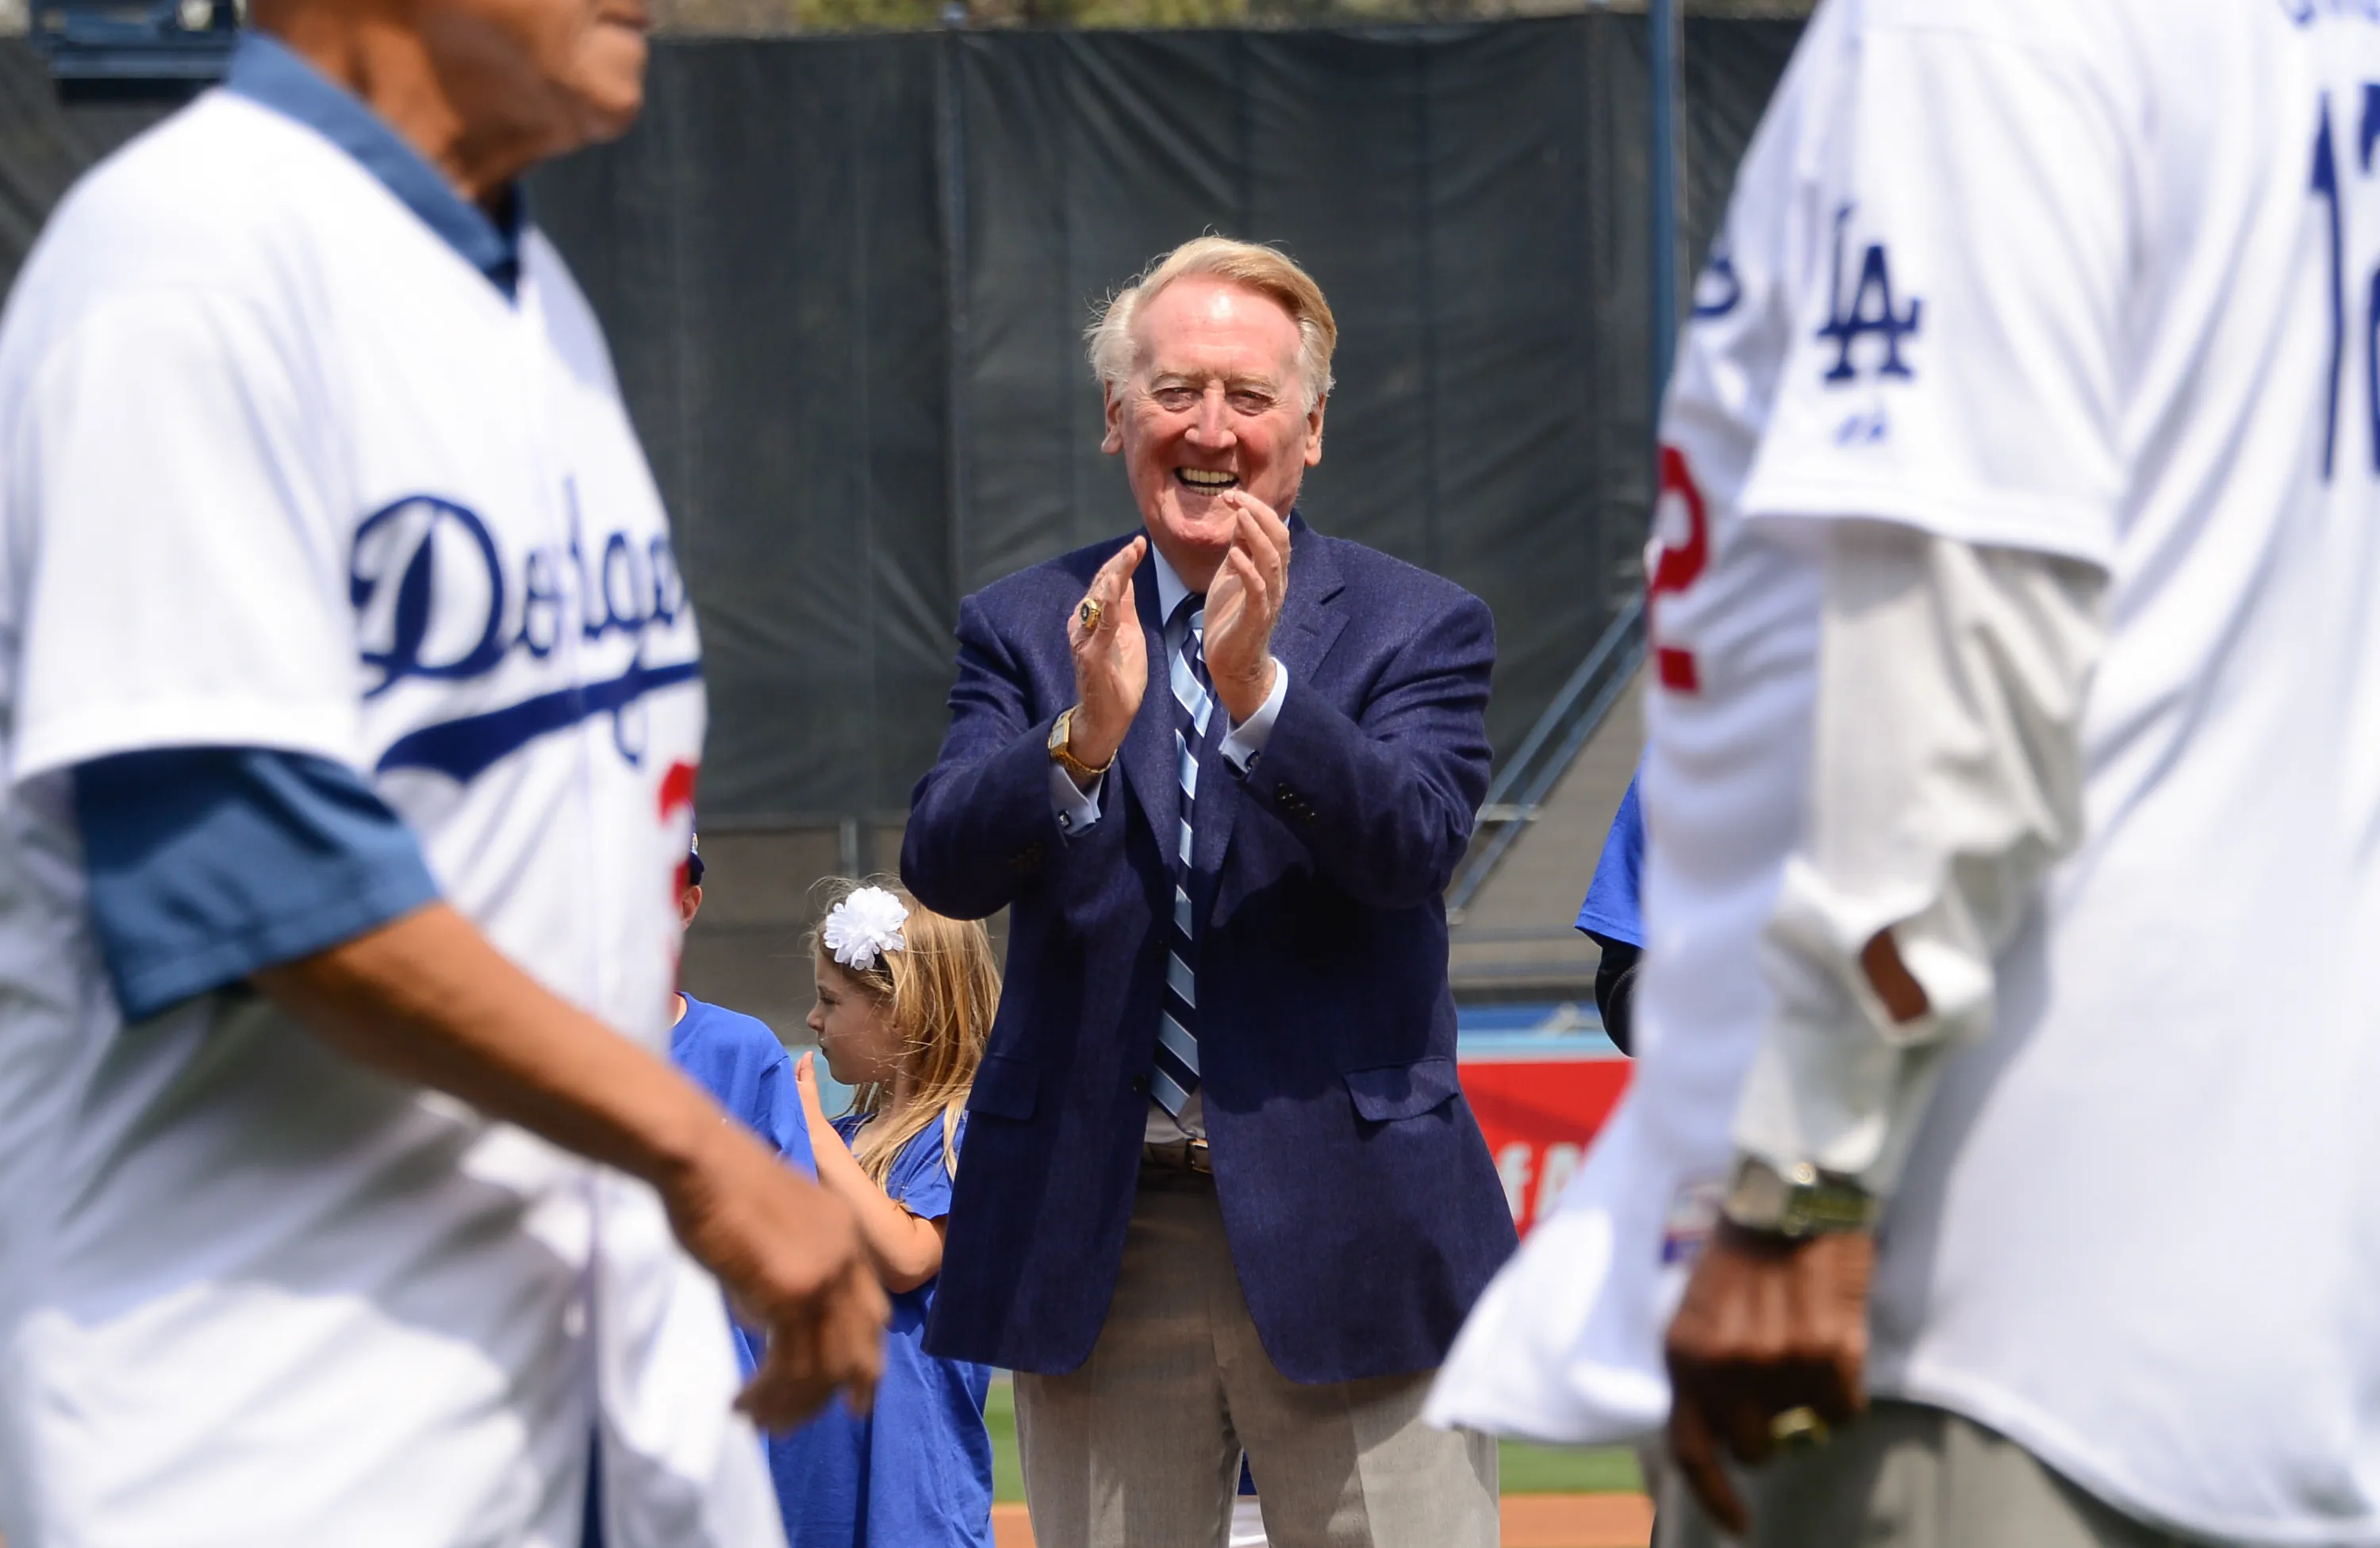 Longtime baseball broadcaster Vin Scully applauds Los Angeles Dodger hall of famers during opening day pre-game ceremonies on April 4, 2014, in Los Angeles, California.?w=200&h=150